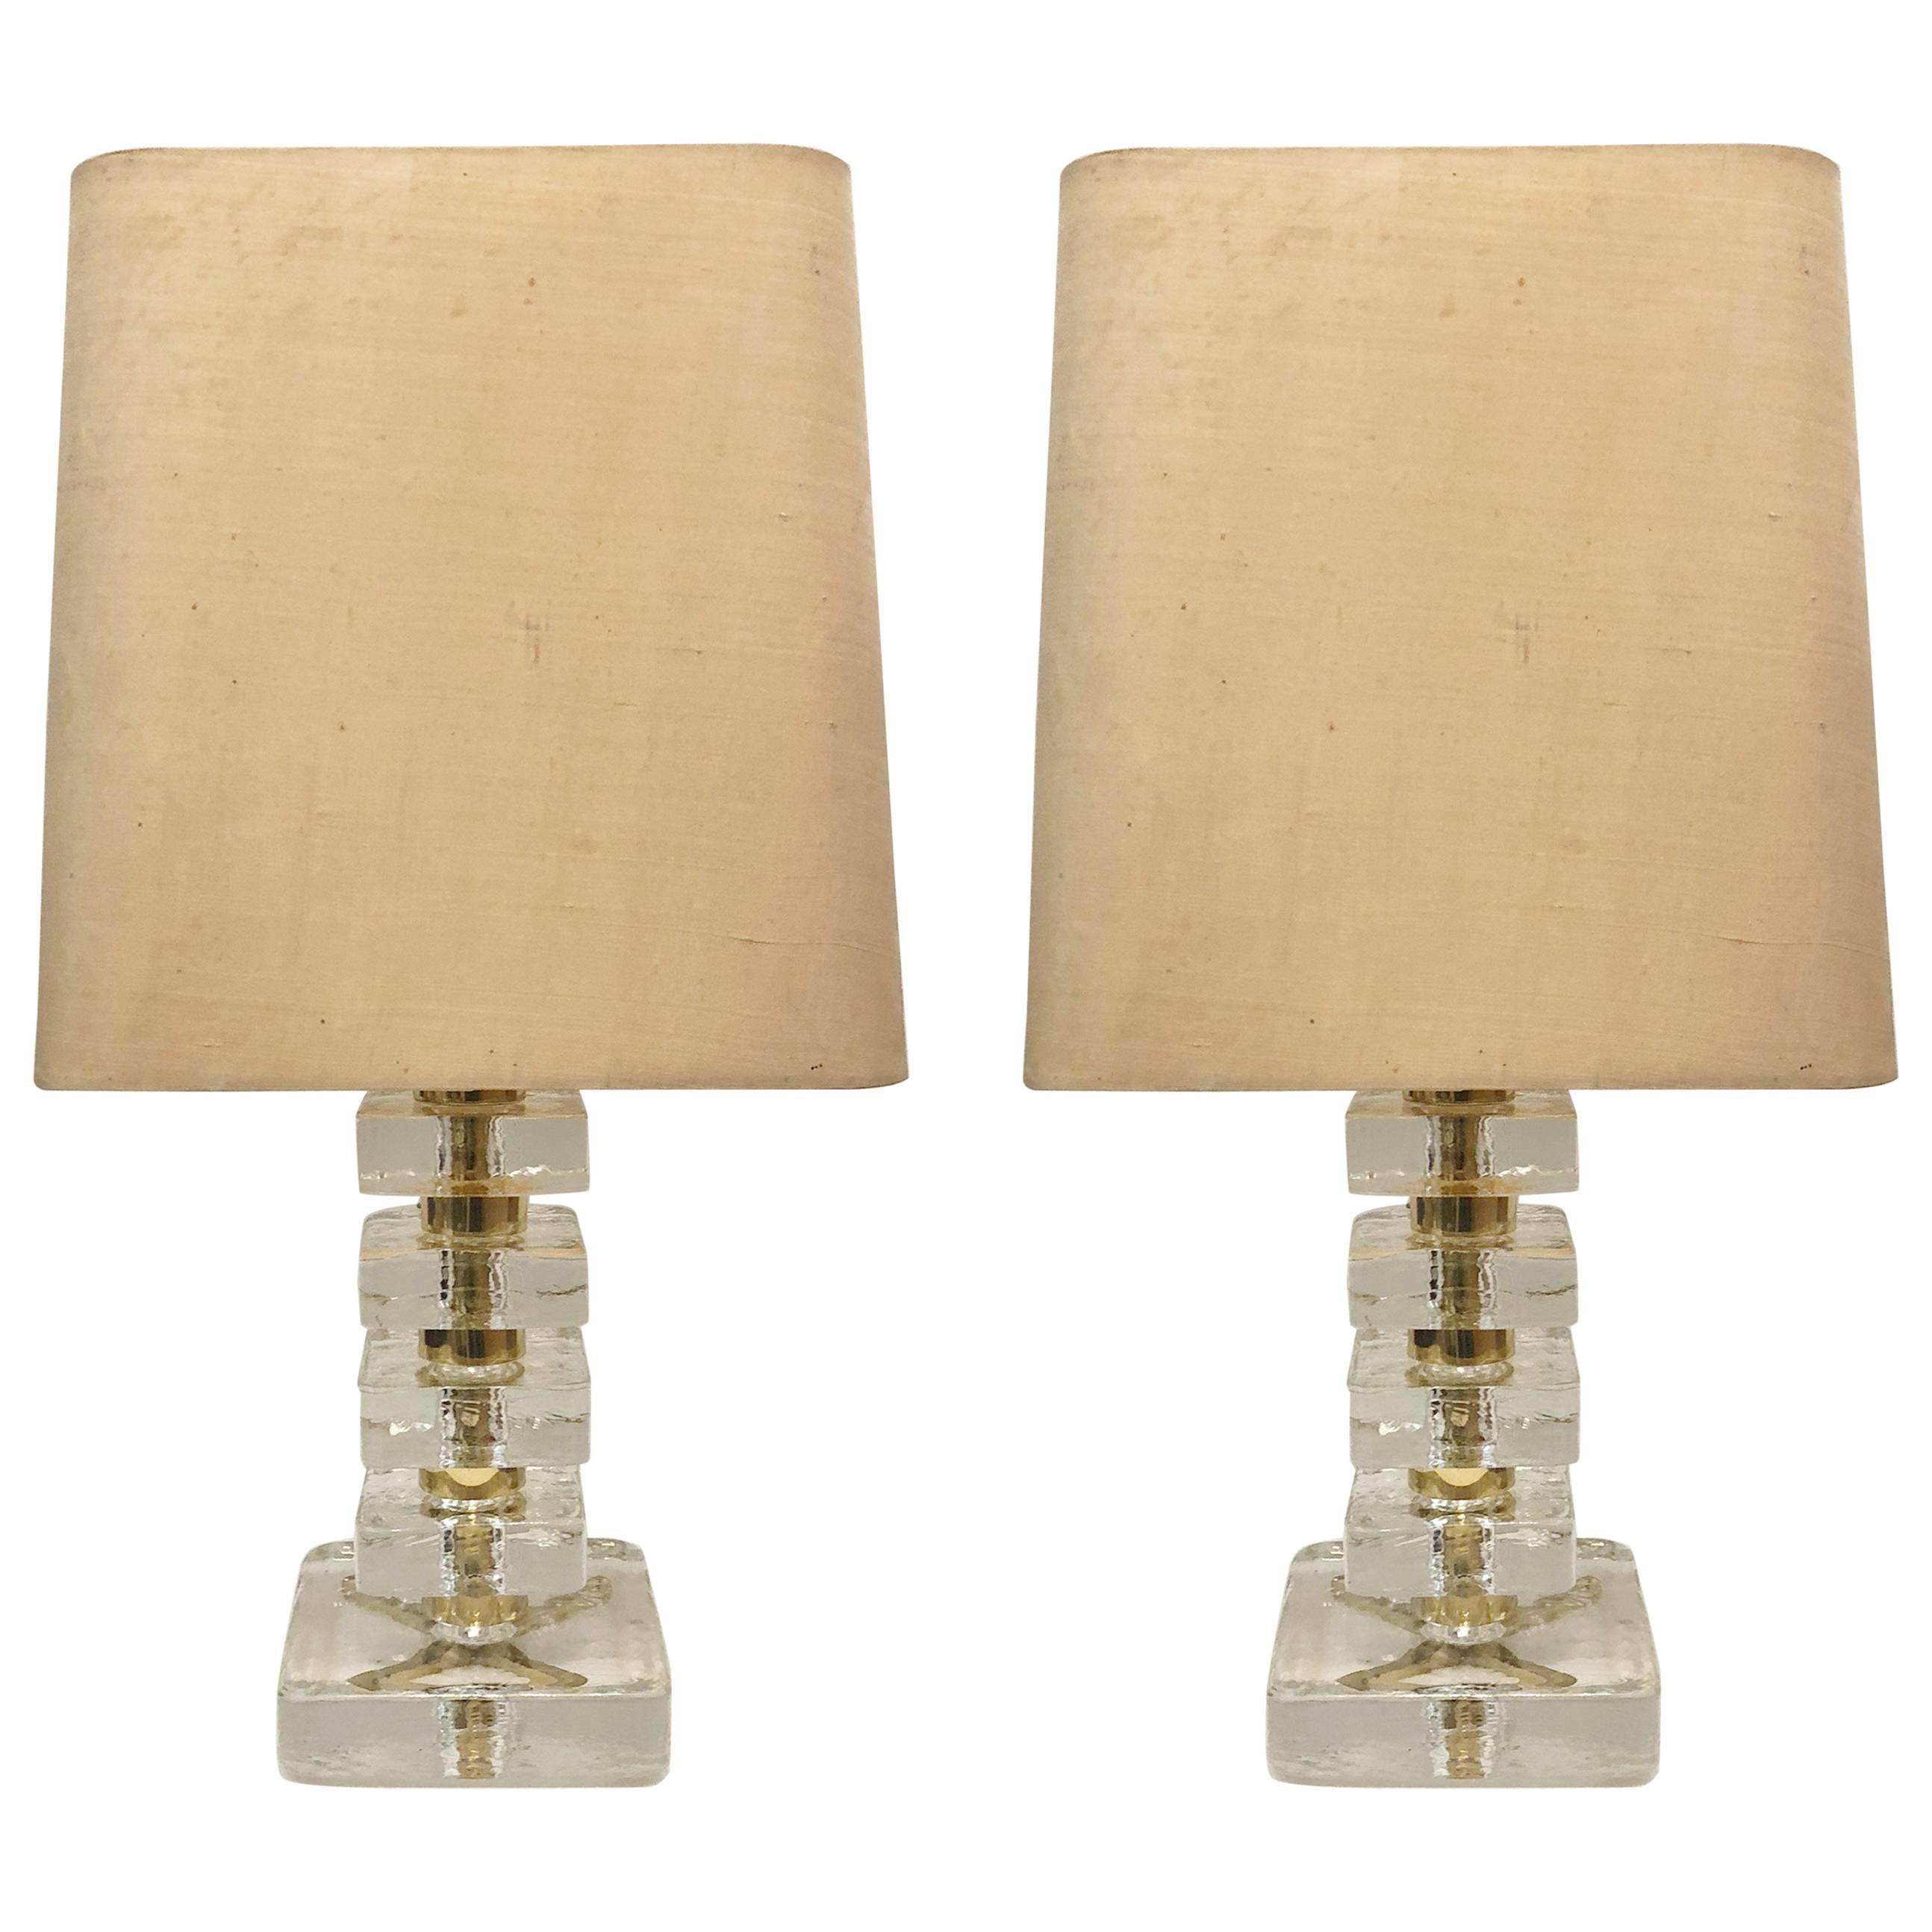 Pair of Table Lamps by Bakalowits & Söhne